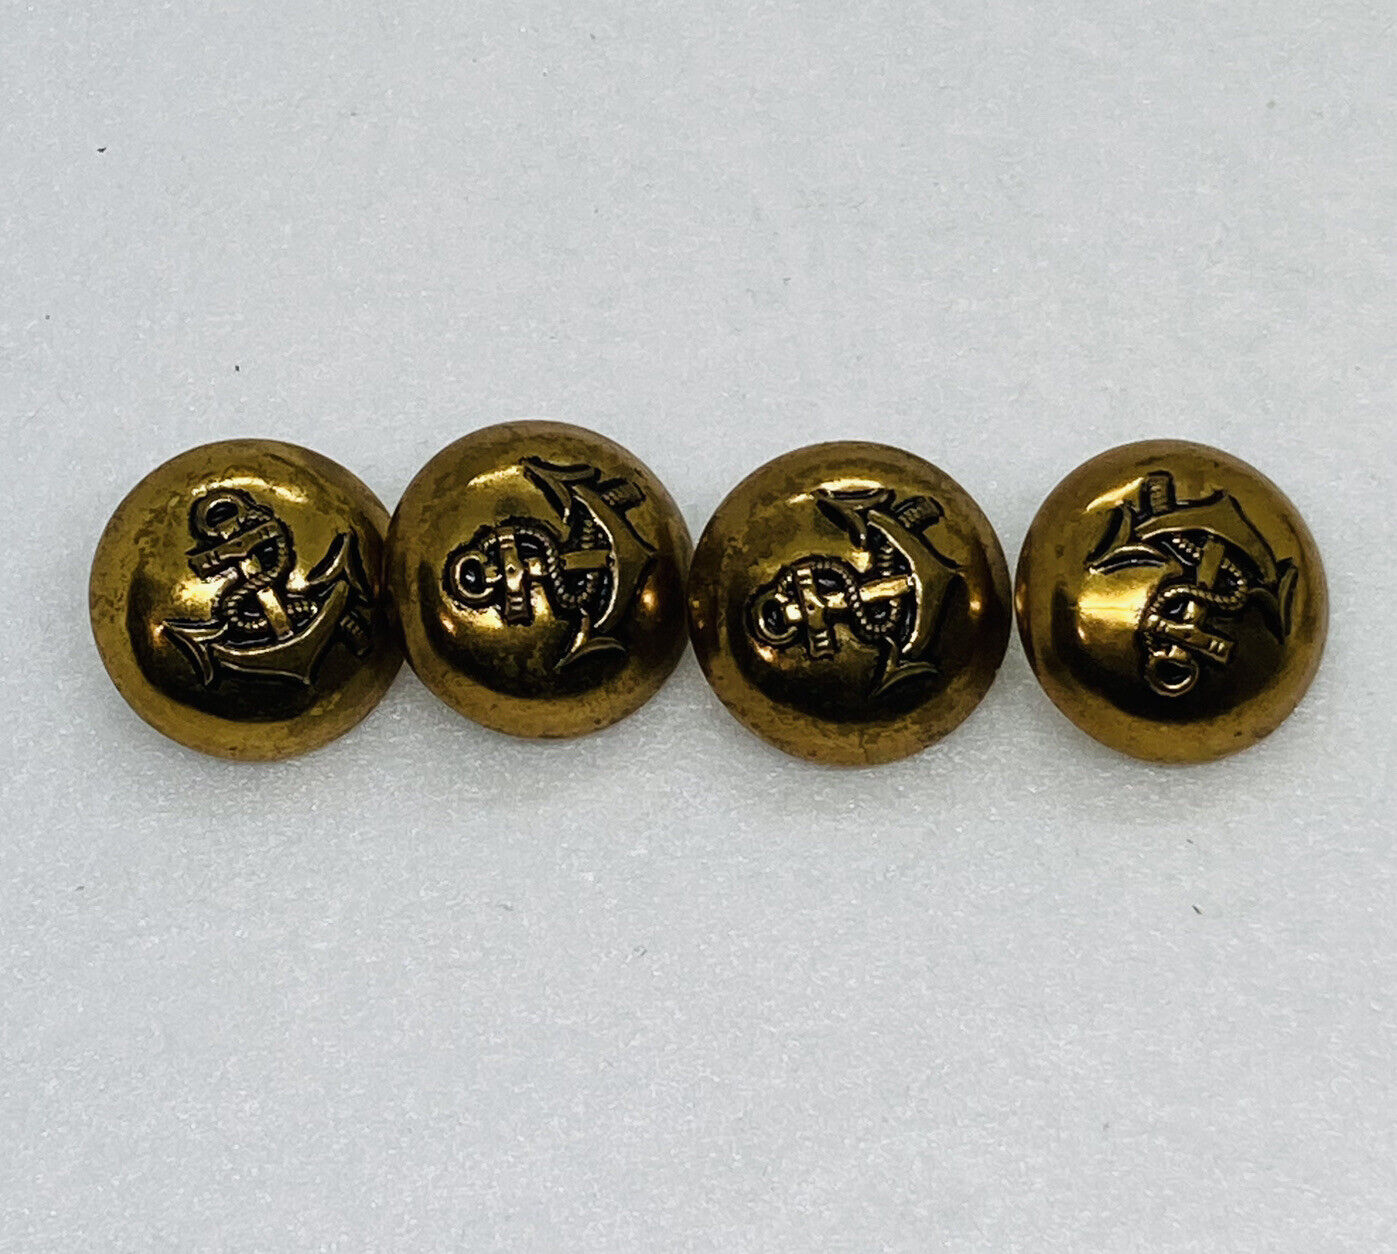 Vintage Royal Naval Crest Buttons Lot Of 4 Coat Jacket Replacement 23mm Rare 22